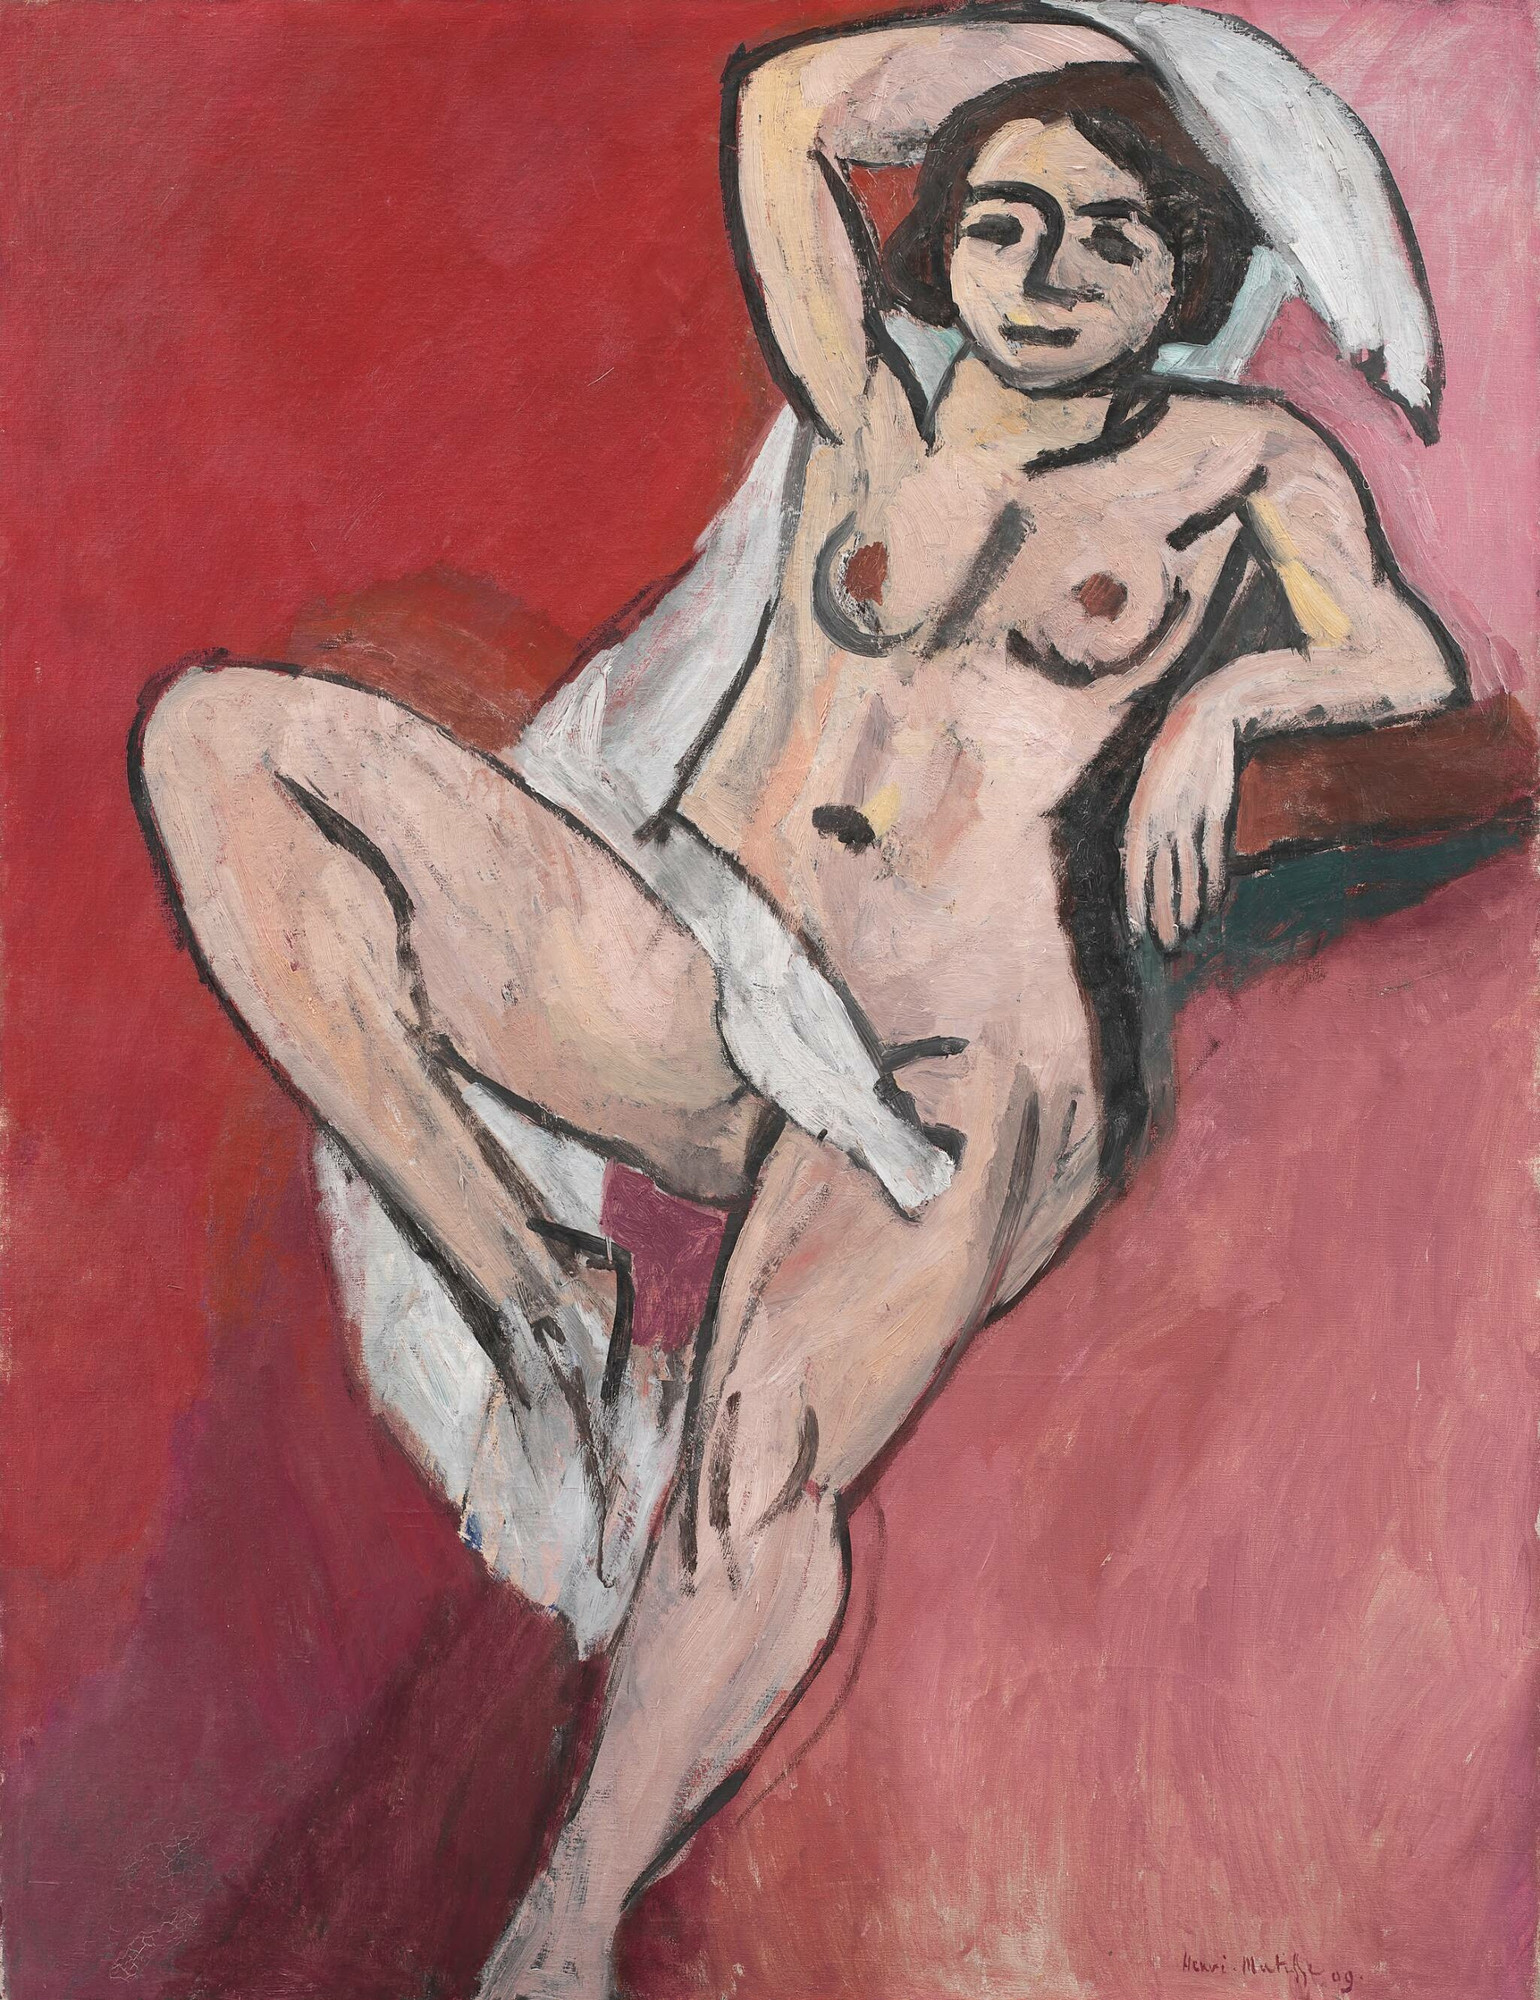 Henri Matisse. *Nude with a White Scarf*. 1909. Oil on canvas, 45 7/8” x 35 1/16” (116.5 x 89 cm). J. Rump Collection. SMK – The National Gallery of Denmark, Copenhagen. © 2022 Succession H. Matisse / Artists Rights Society (ARS), New York